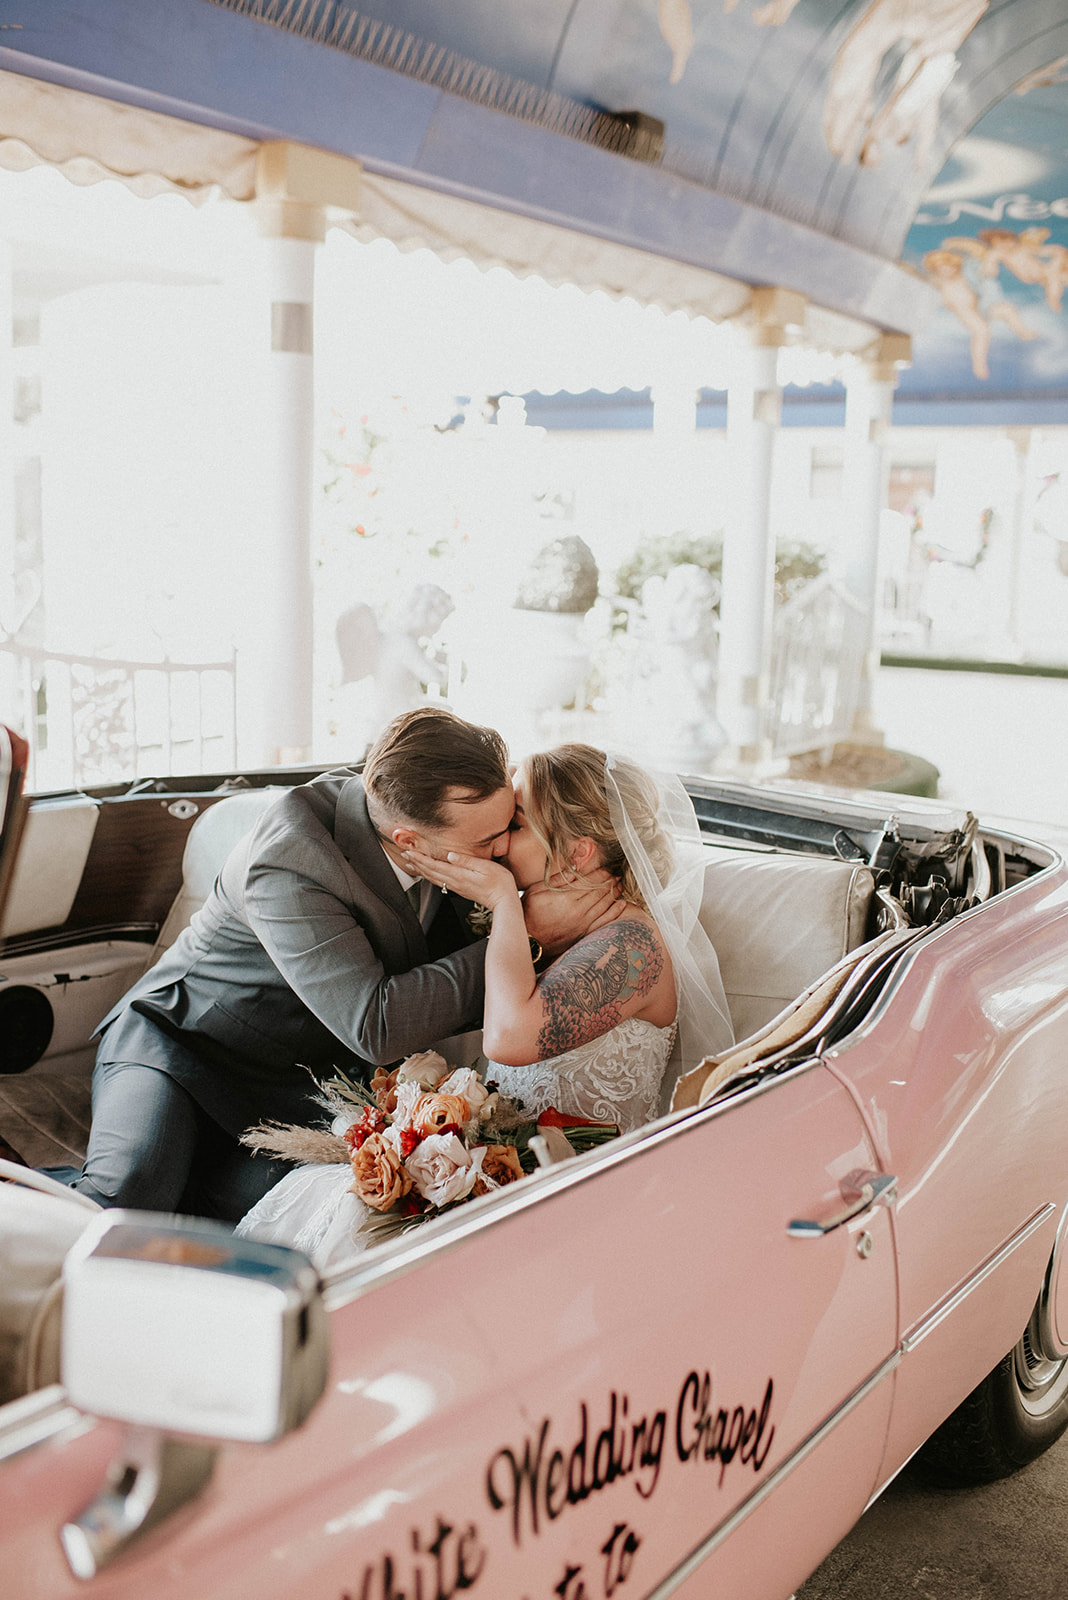 First Stop! A Little White Chapel Bride and groom share a kiss inside the pink Cadillac.